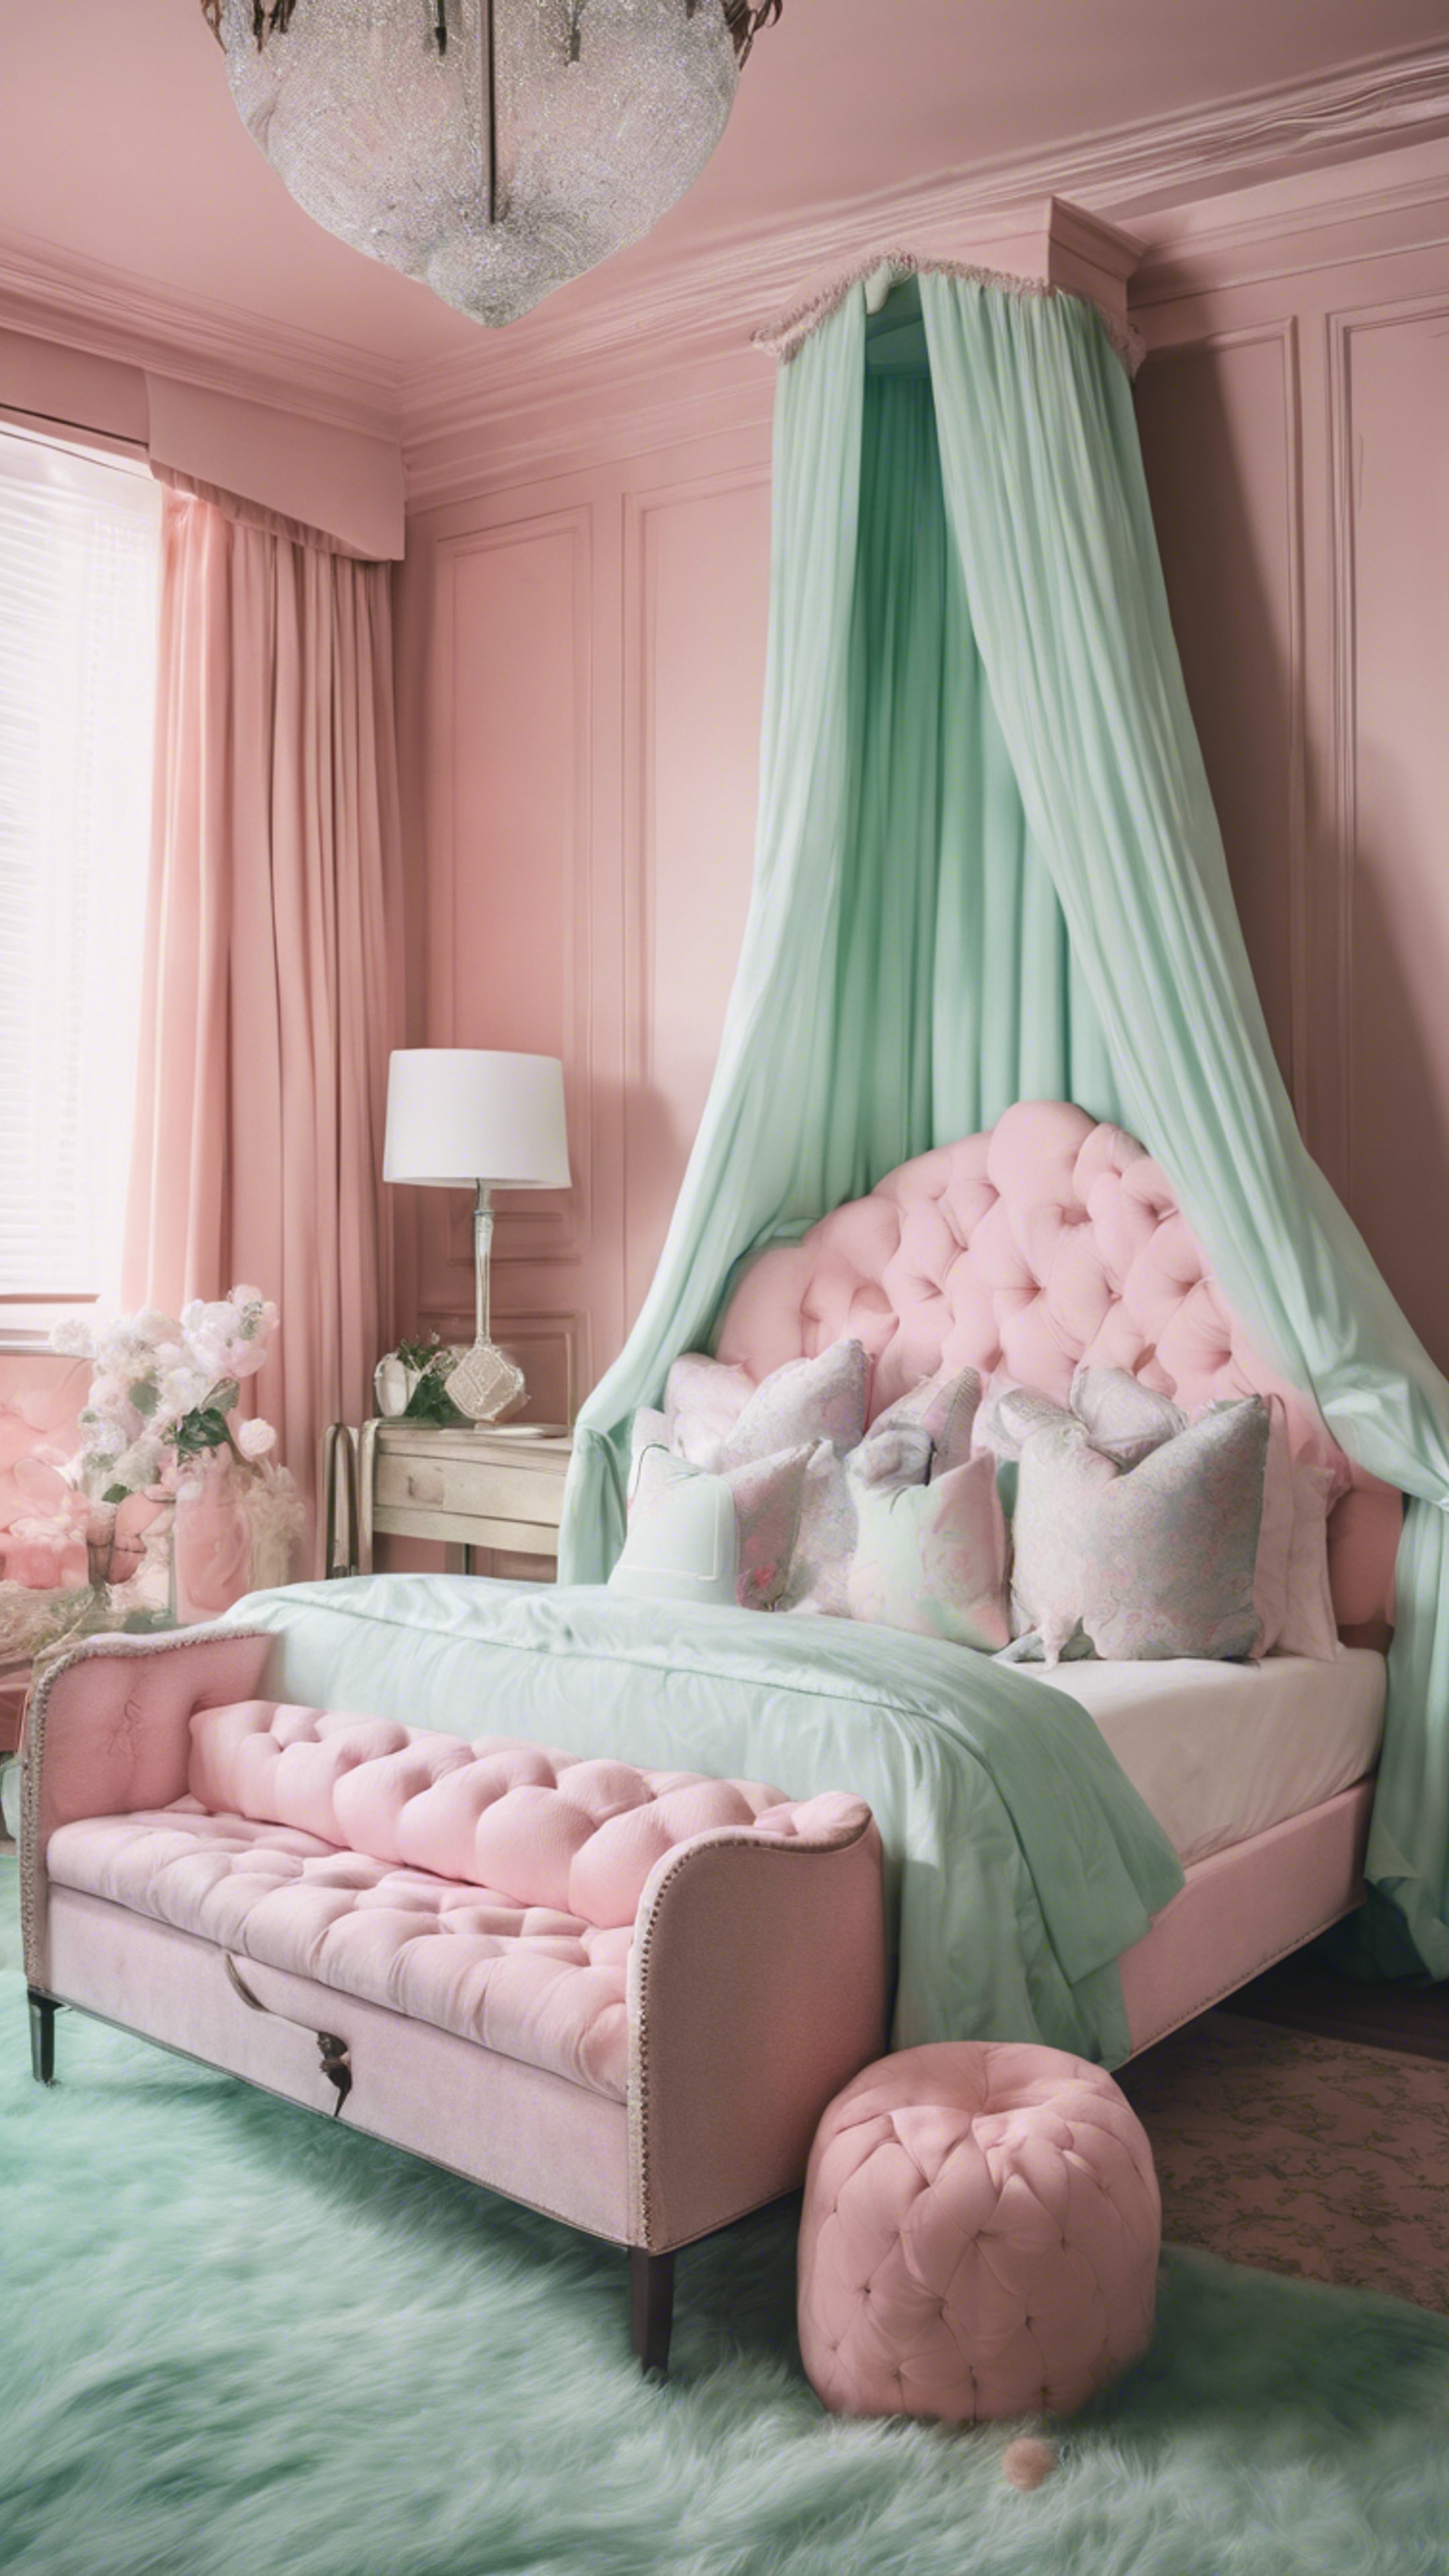 A sprawling pink and mint green preppy-style bedroom with a canopy bed and monogrammed pillows. Валлпапер[80ed71ae36e84fc093e2]